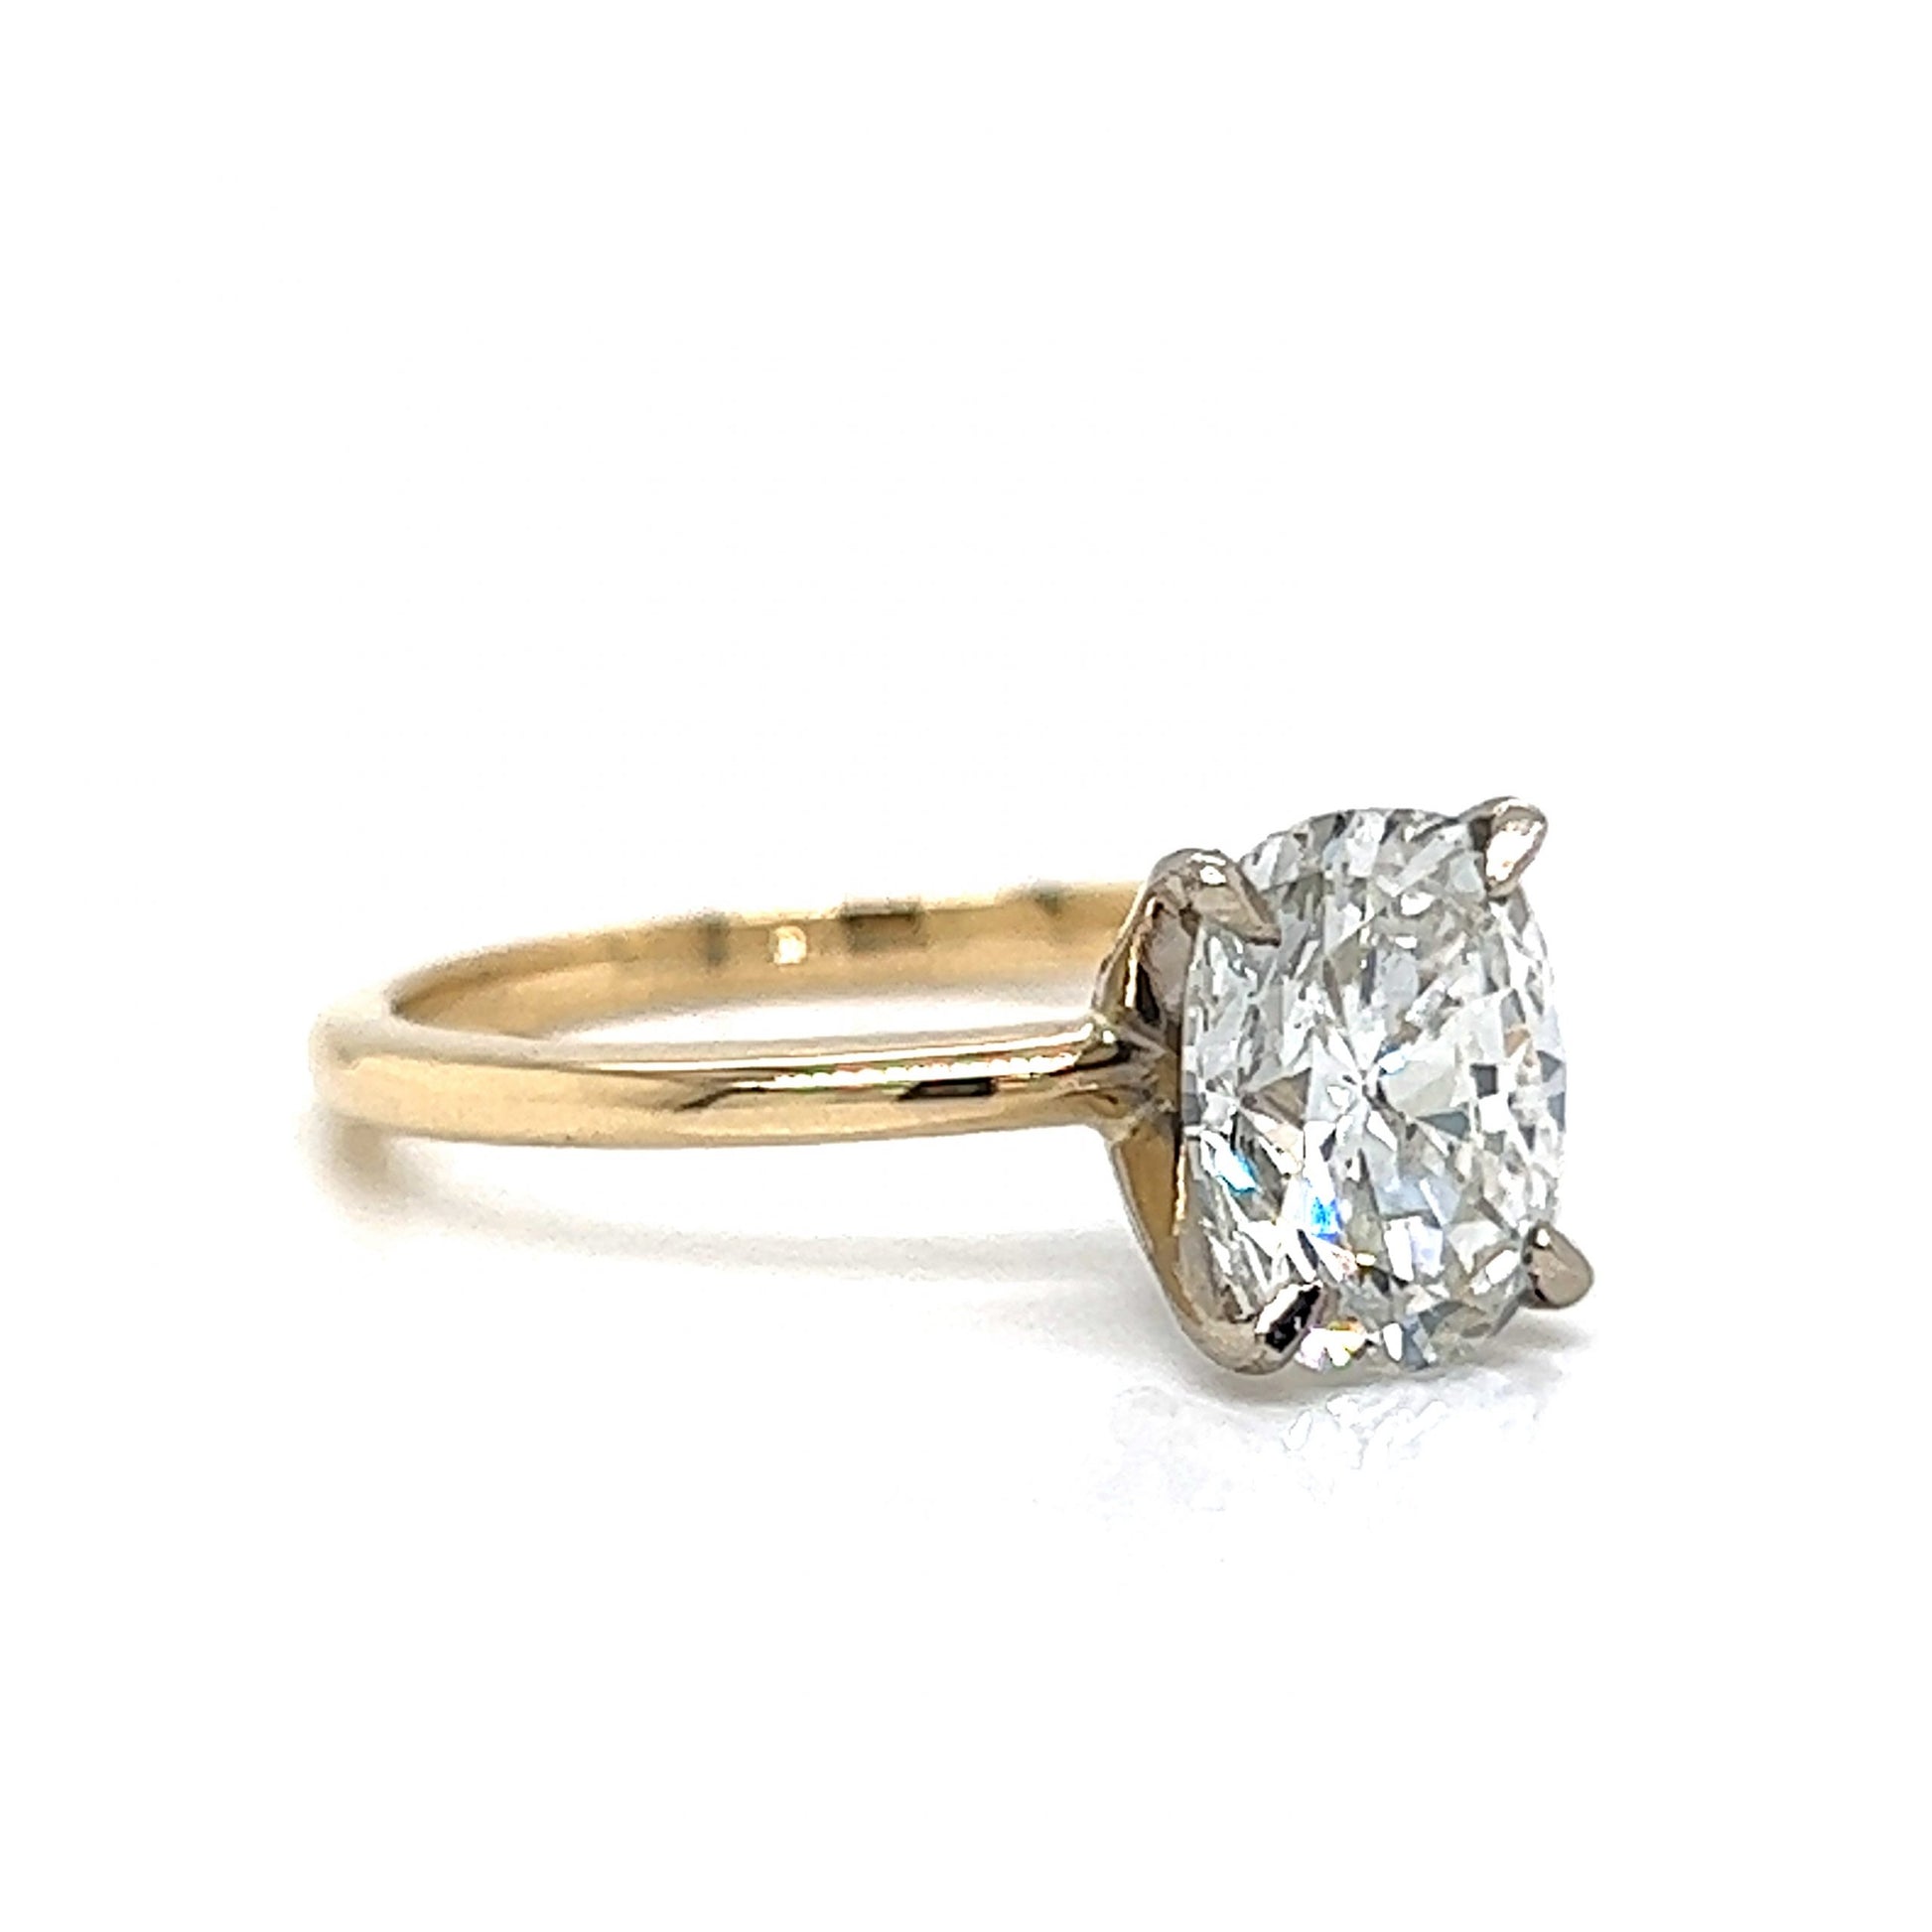 2.12 Solitaire Cushion Cut Diamond Engagement Ring in 14k Gold